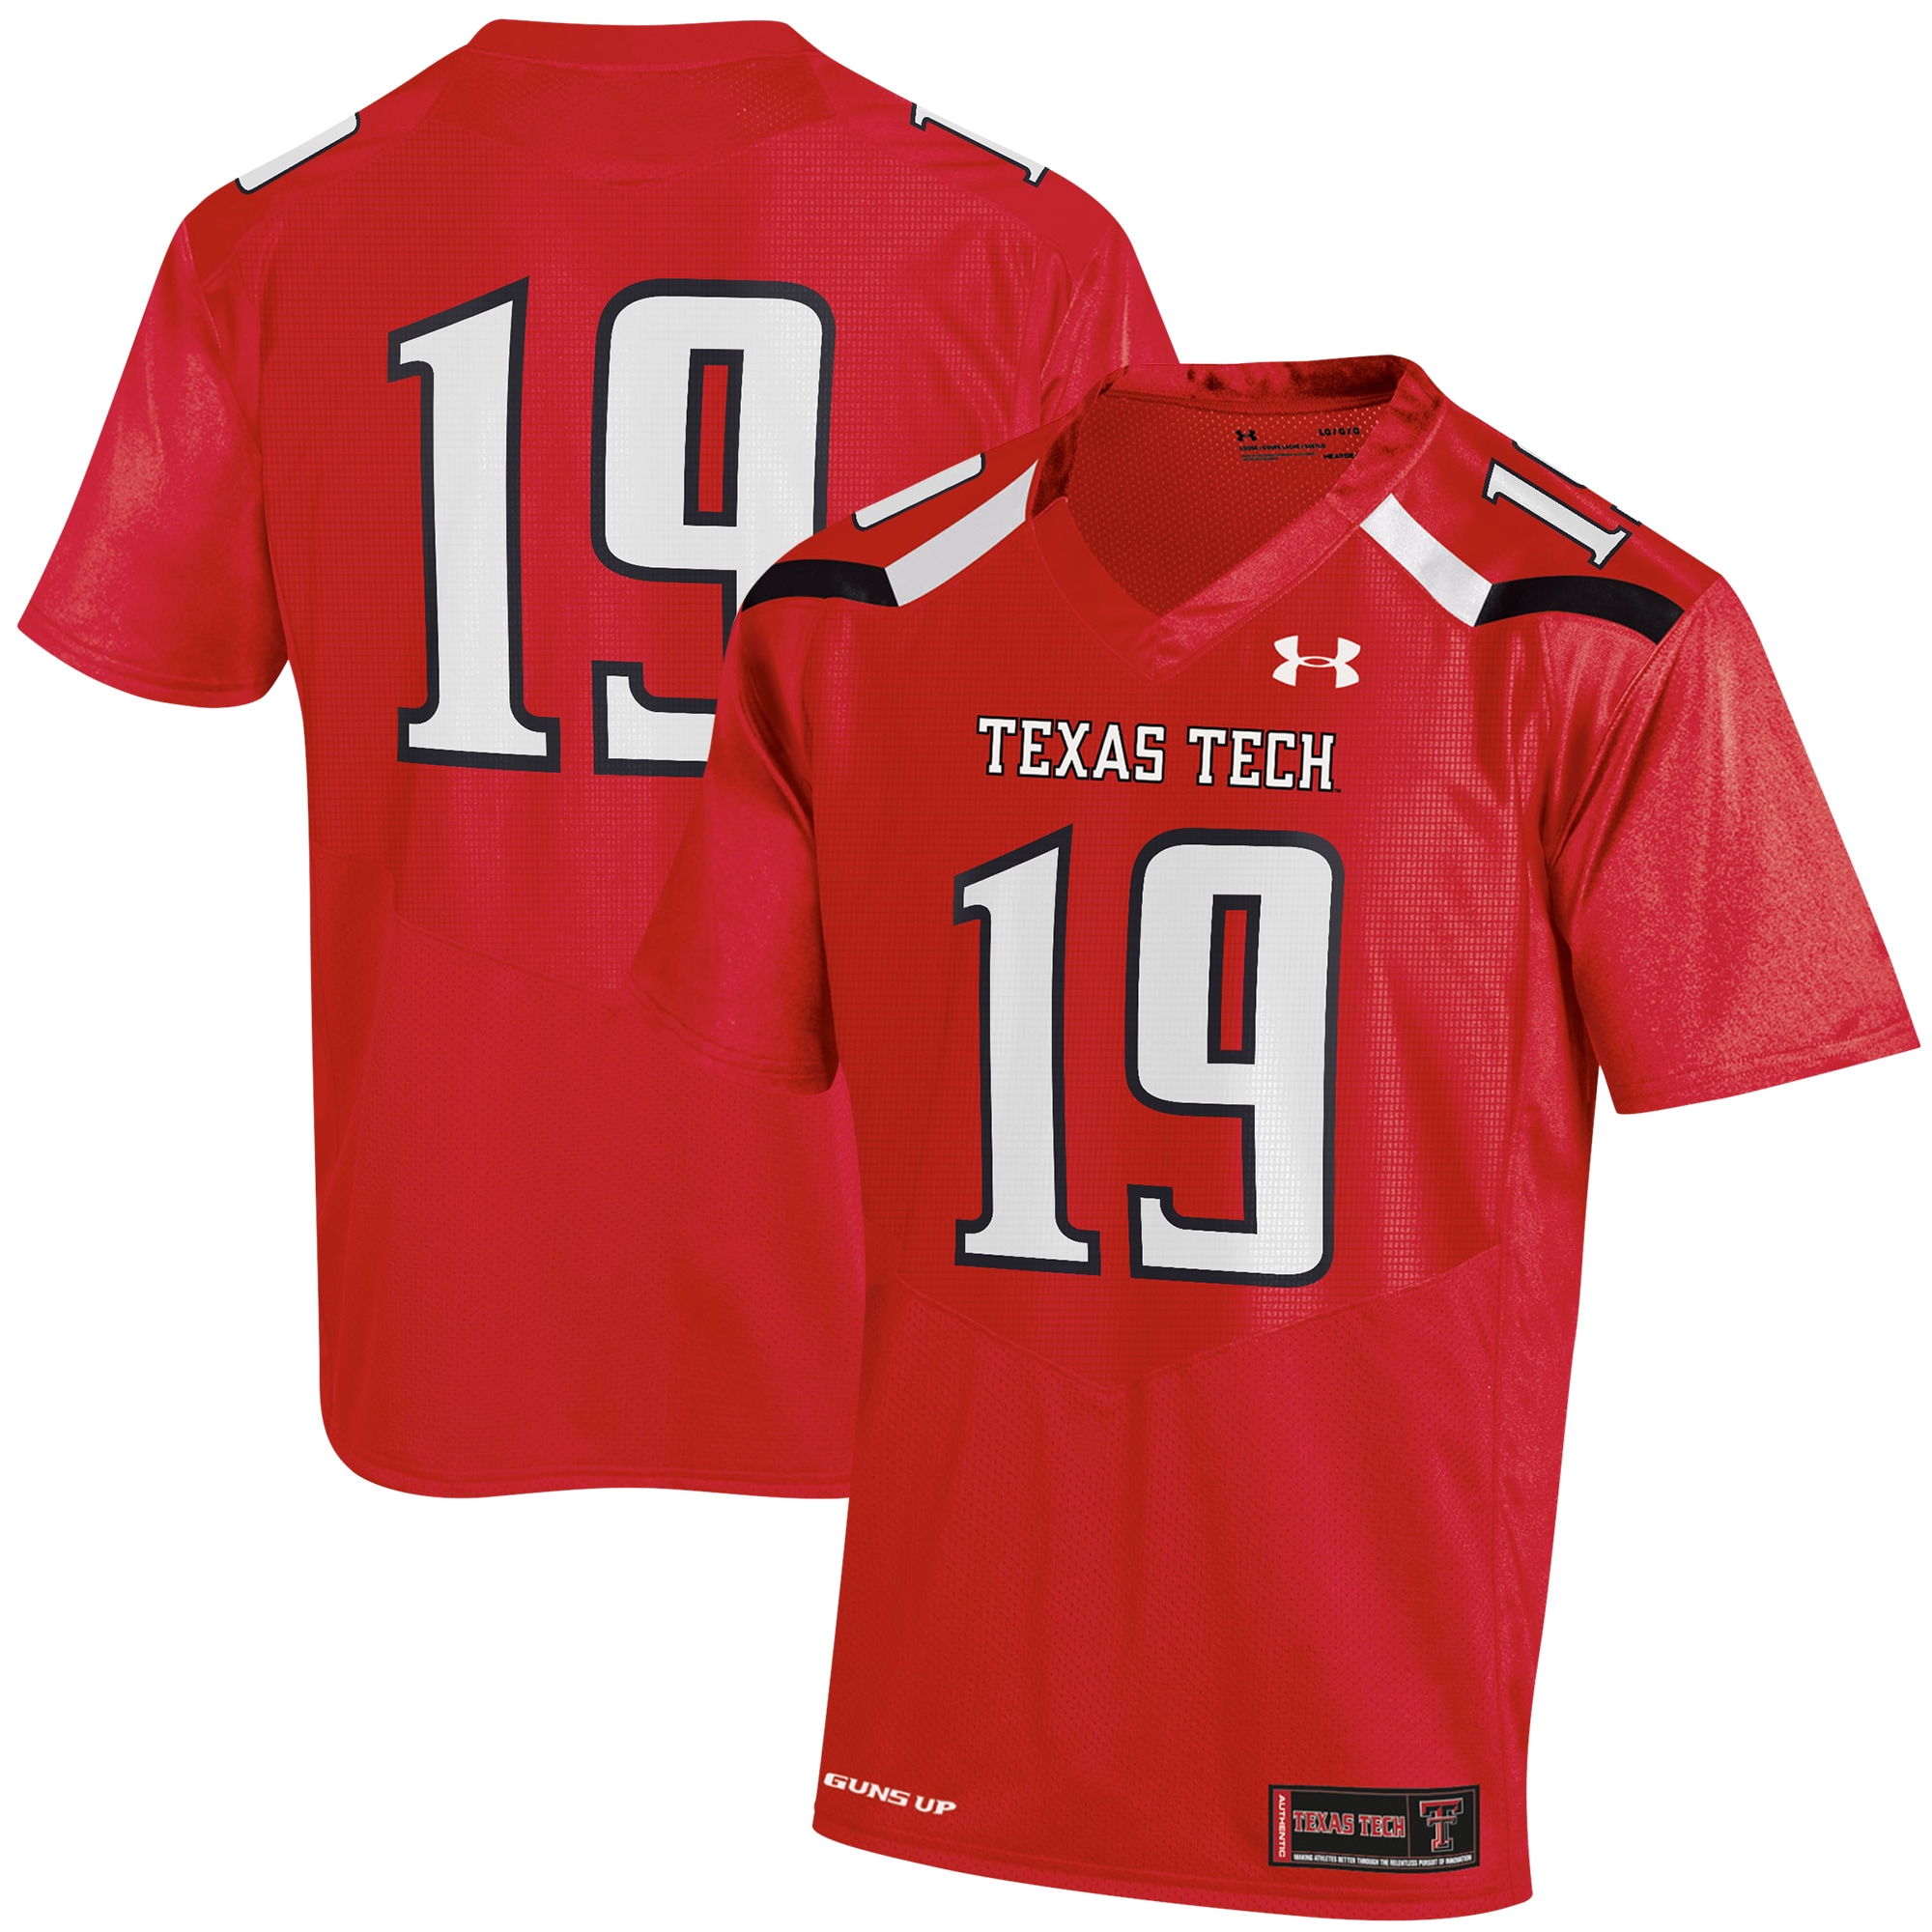 #19 Texas Tech Red Raiders Under Armour Replica Jersey - Red For Youth Women Men